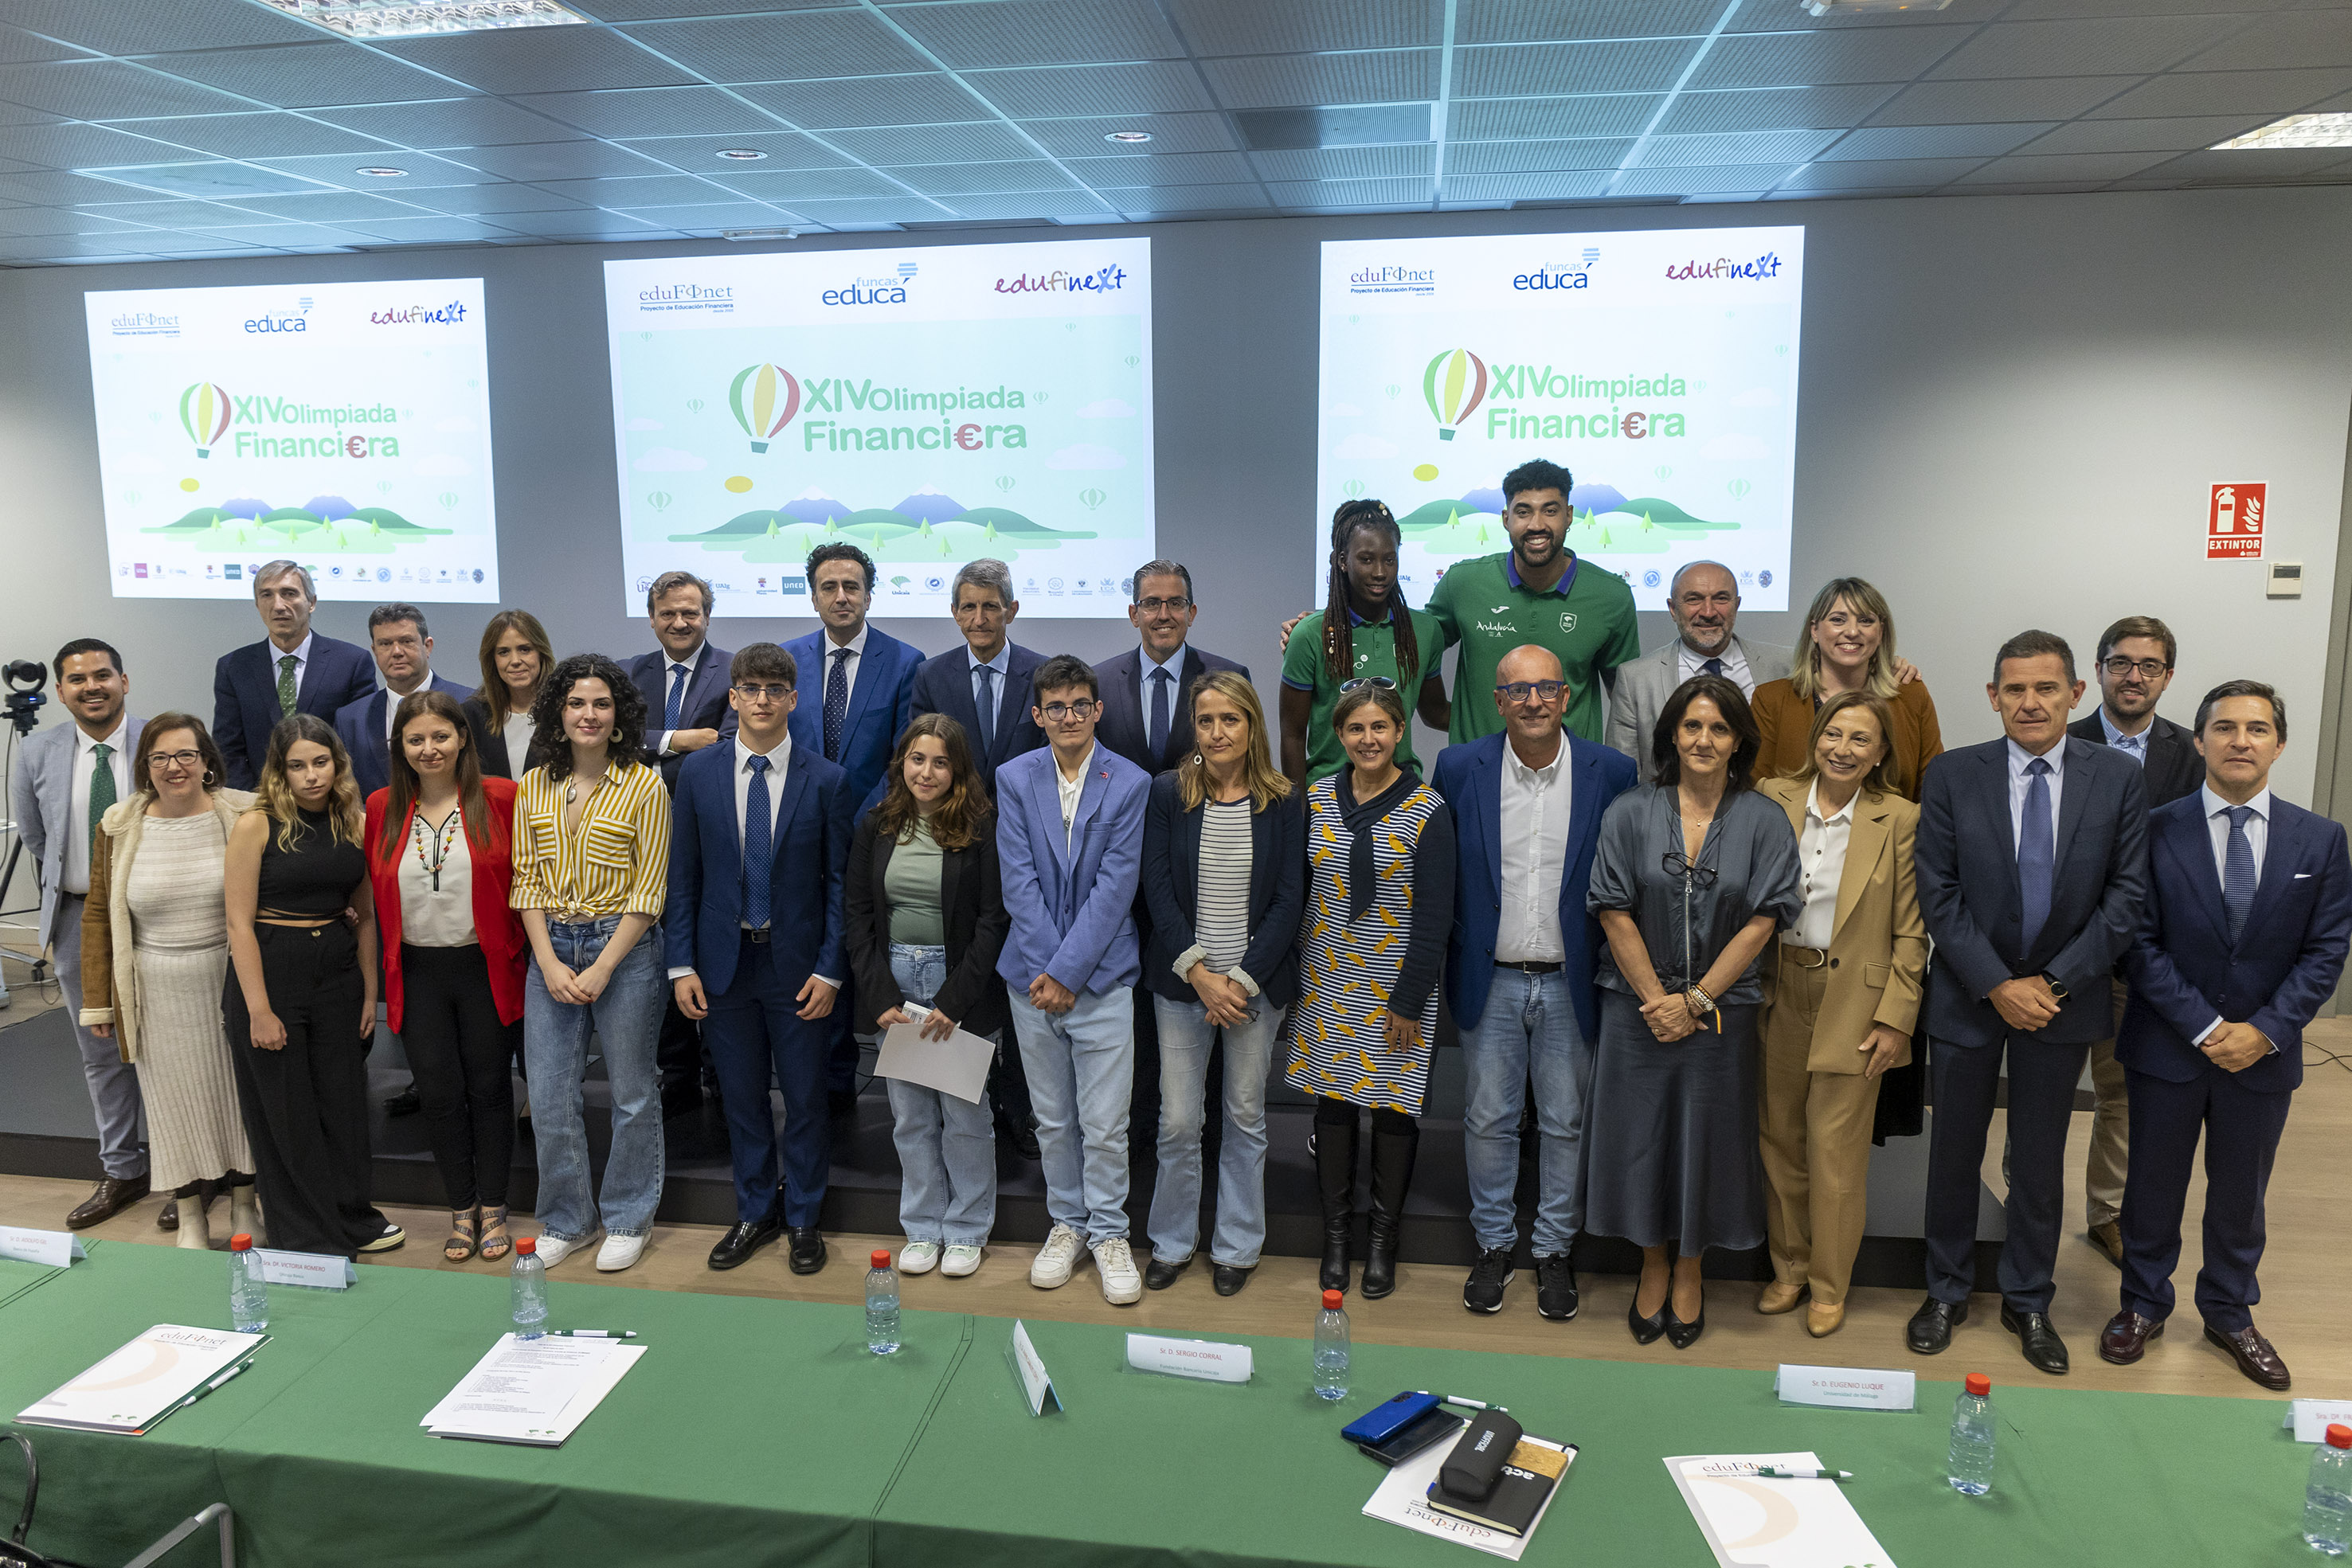 Unicaja Edufinet Project awards the best financial education projects in its 14th Financial Olympics